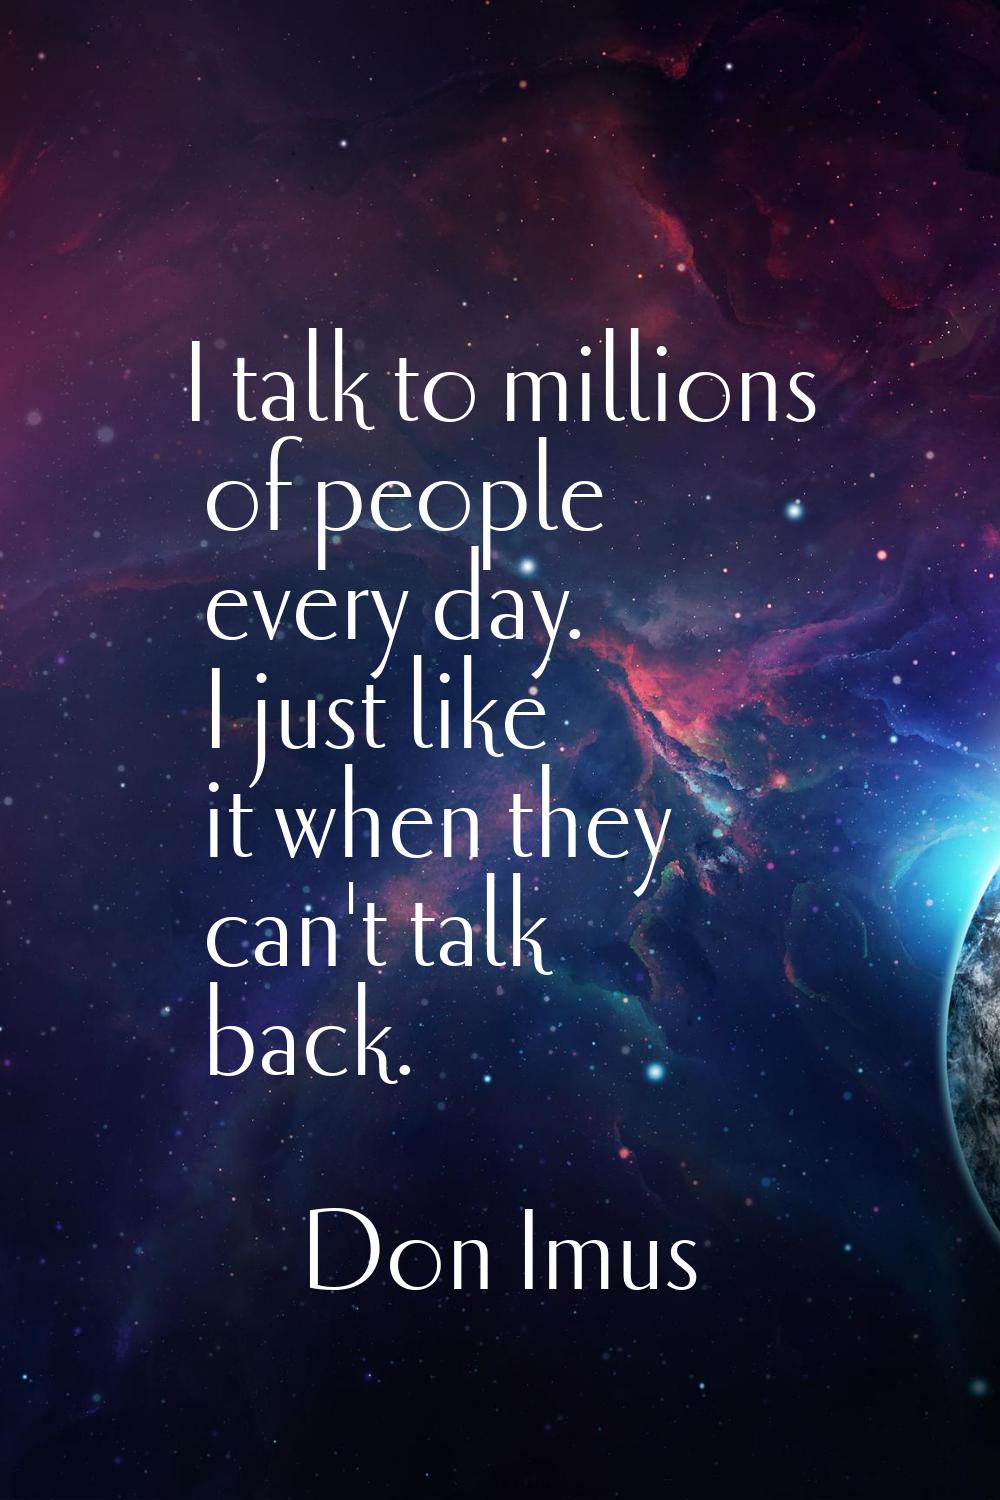 I talk to millions of people every day. I just like it when they can't talk back.